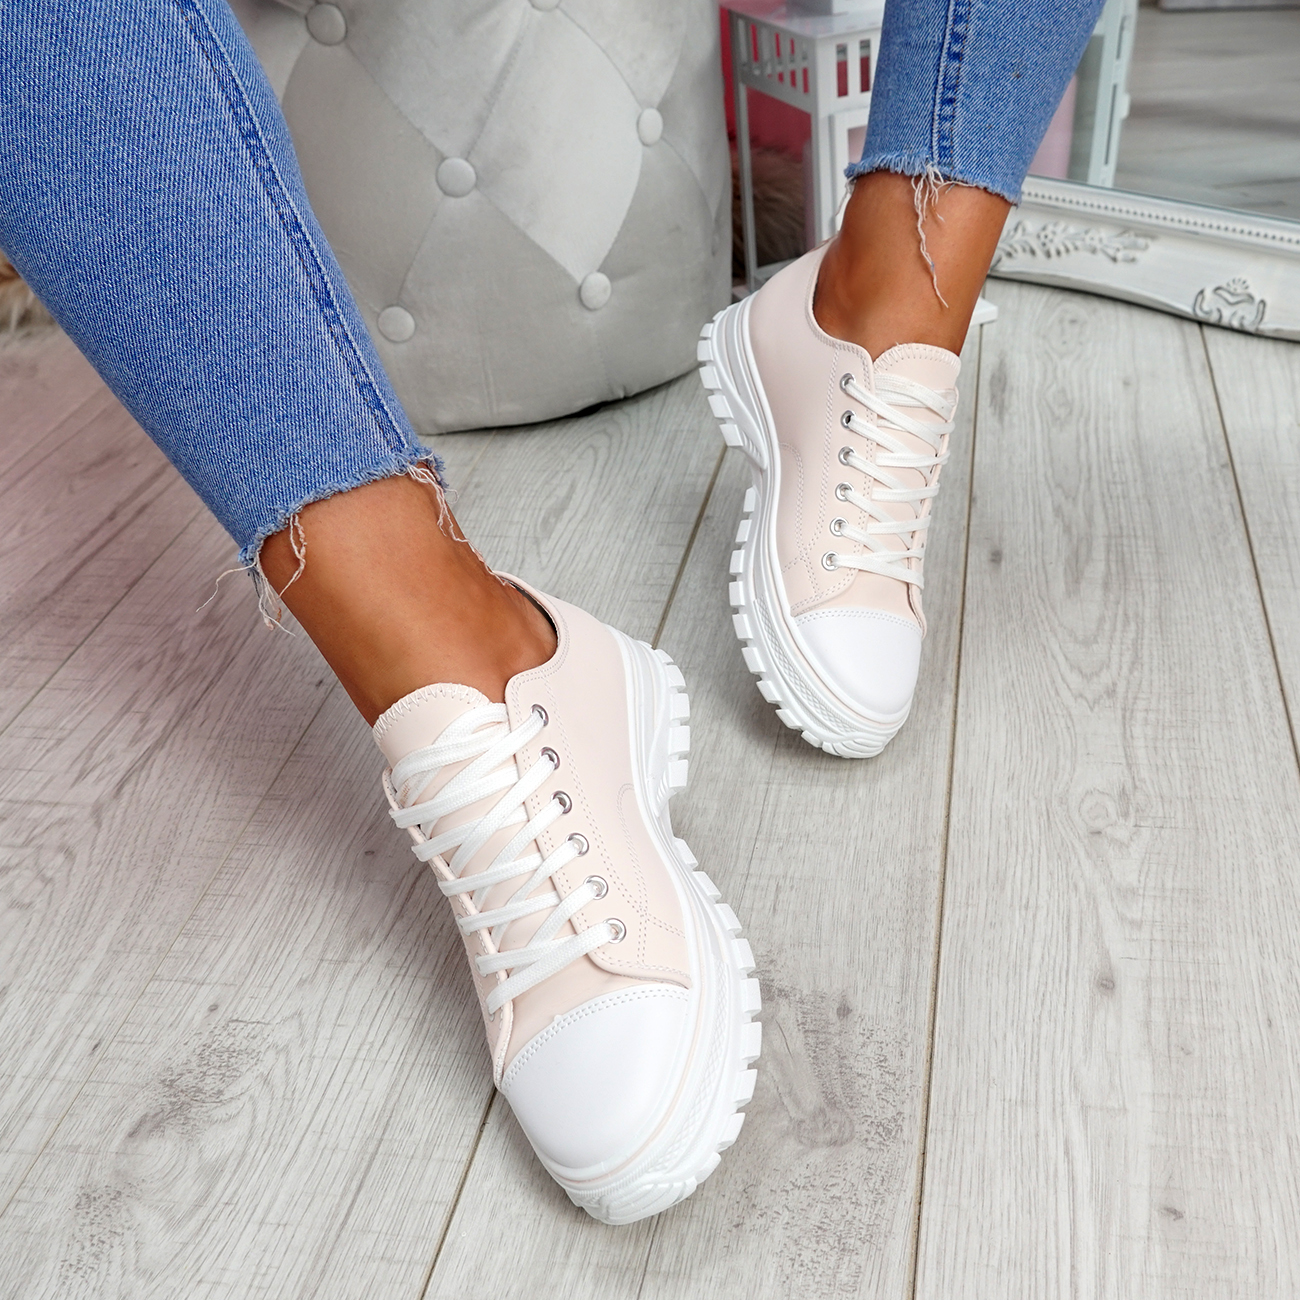 WOMENS LADIES LACE UP TRAINERS COMFY CASUAL CHUNKY SNEAKERS PLIMSOLLS ...